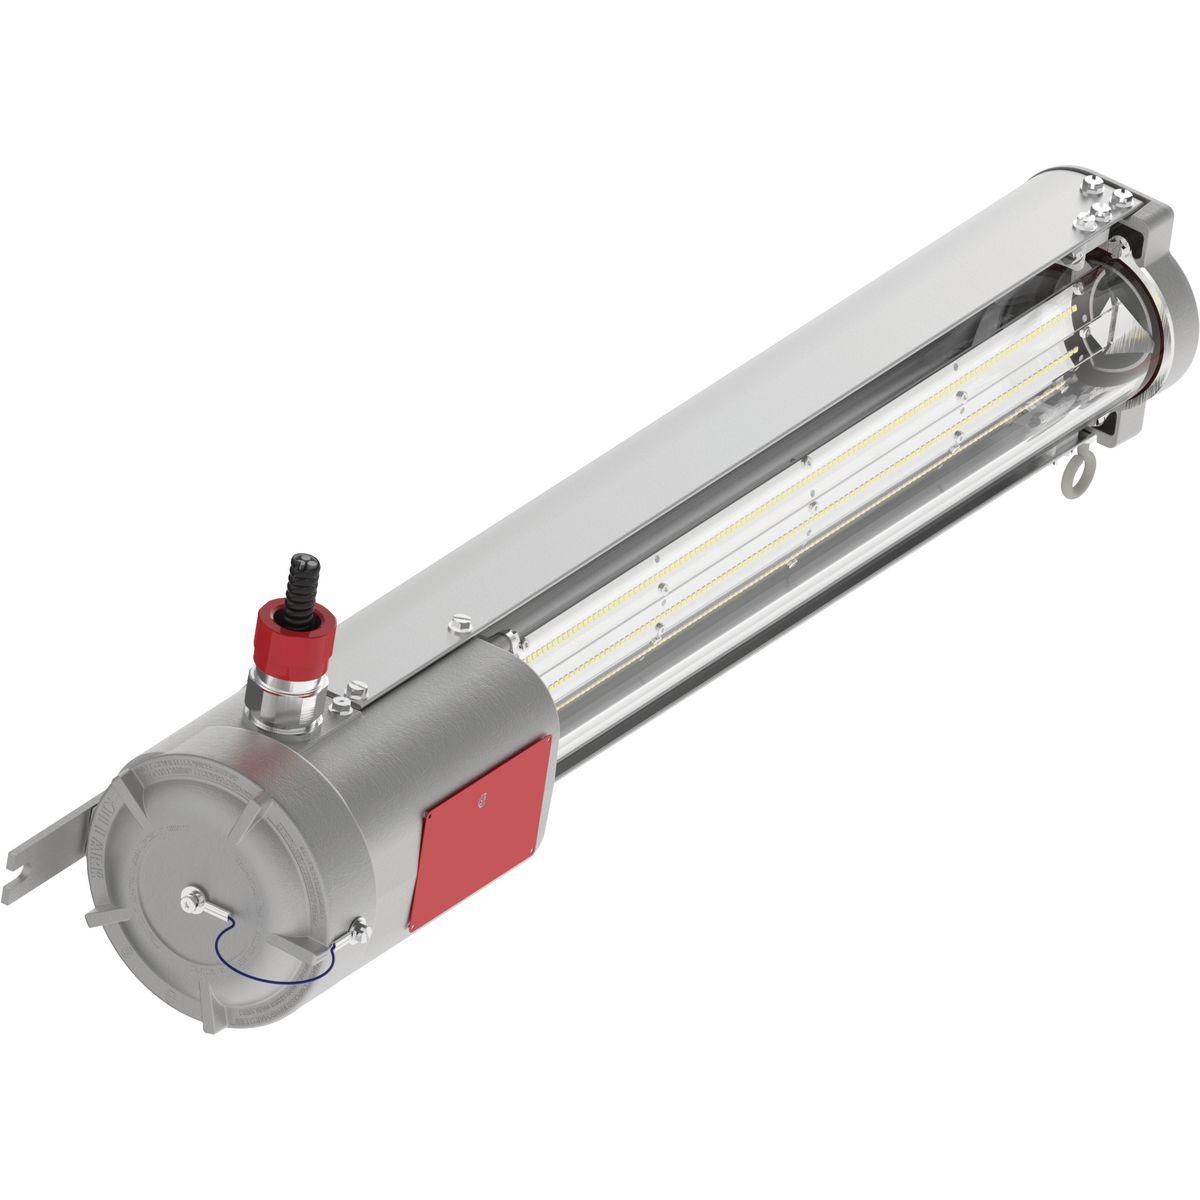 Hubbell L1L1030D-3590 L1L Series 10,000 Lumen Output 3500K CCT & 90 CRI, 120-277 Universal Voltage With Diffuse Glass Optic  ; Tool-less access to wiring chamber ; Slot-back design allows for a 5/16 or M8 bolt to be mounted anywhere along the back of the luminaire ; Standard s